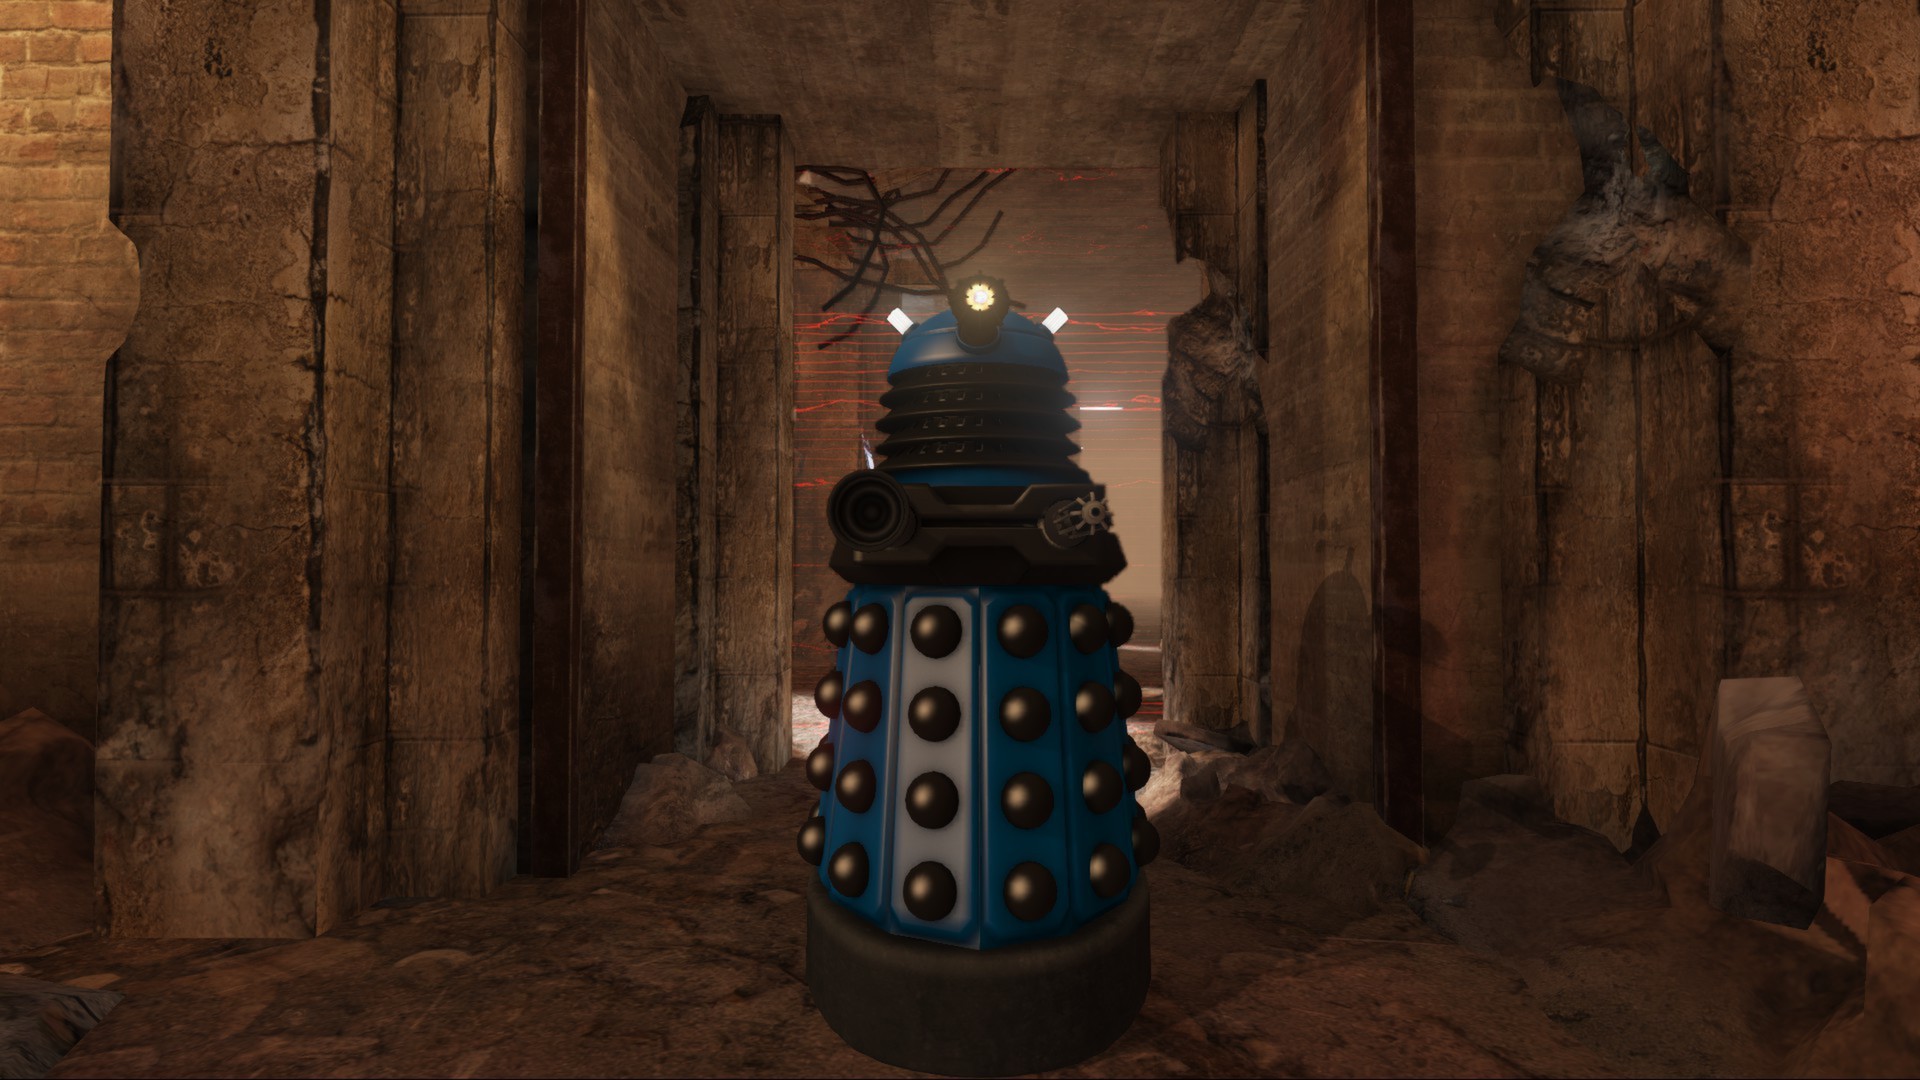 doctor who the eternity clock ps4 download free